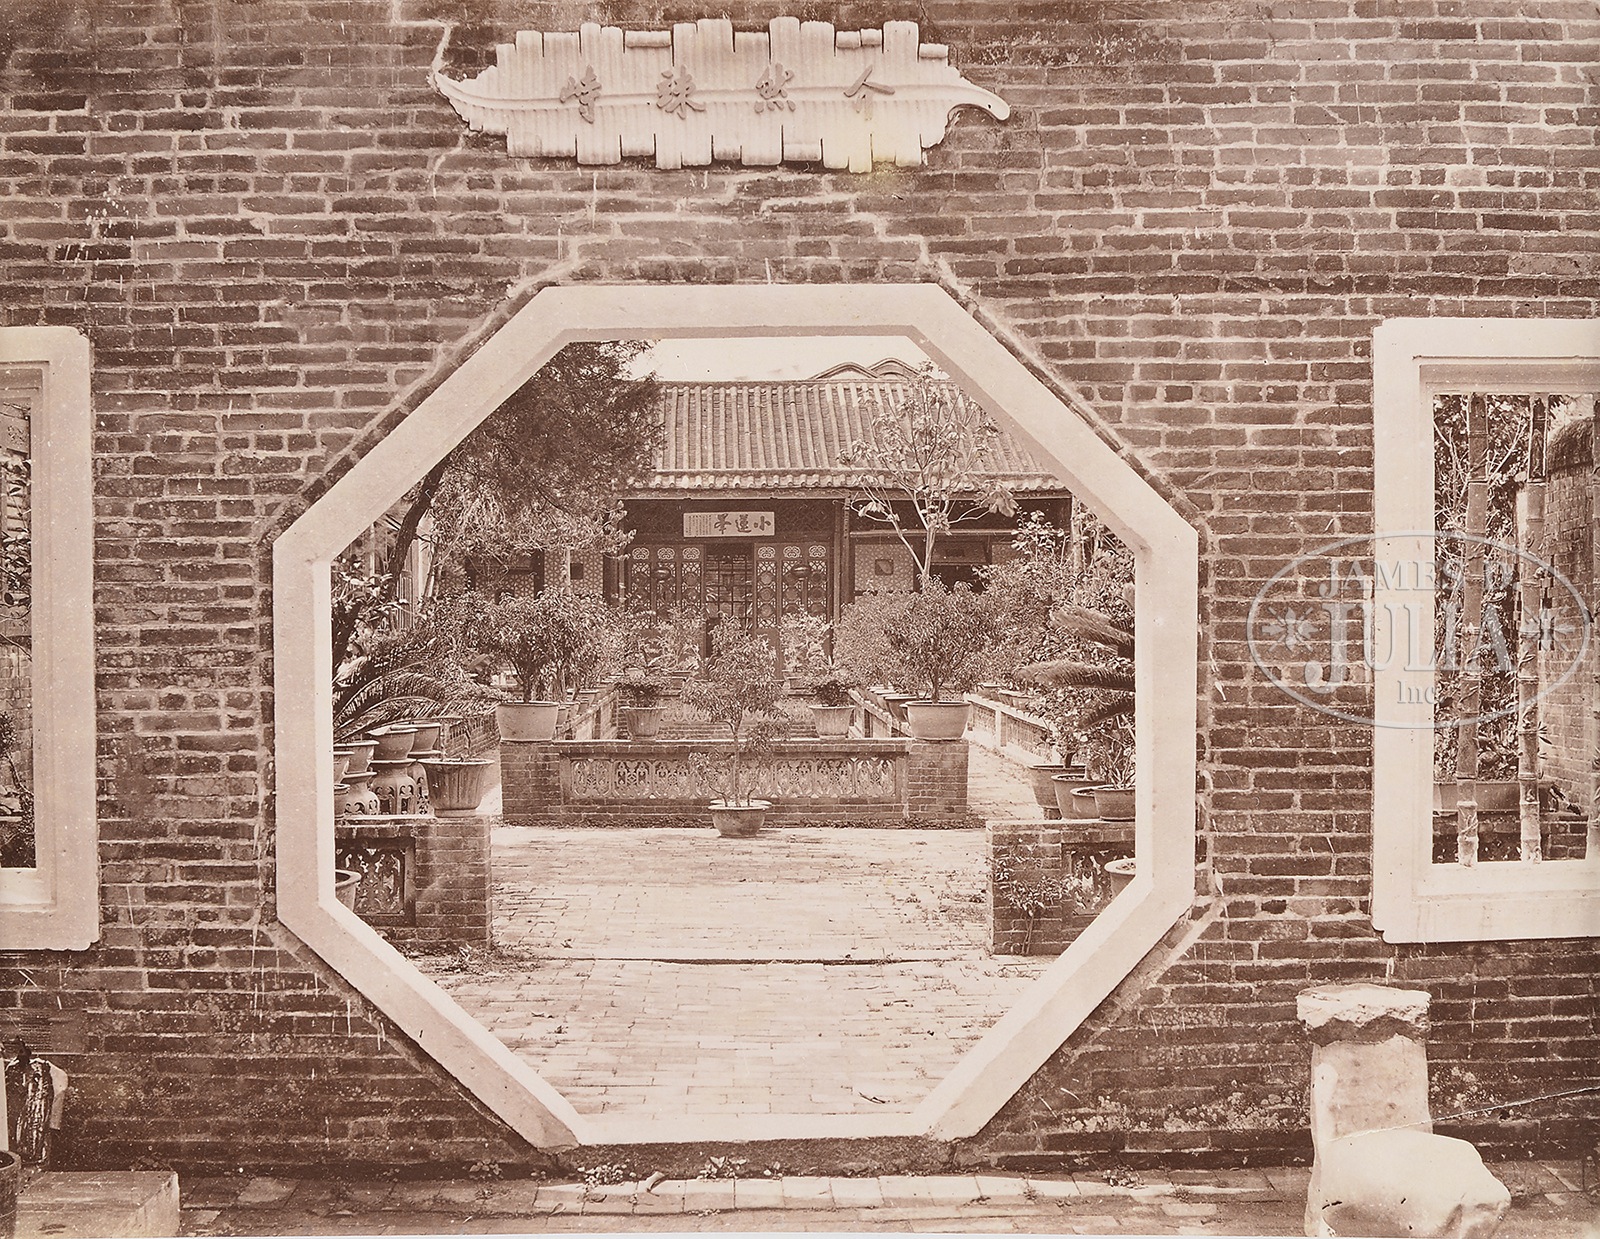 EXTRAORDINARY & MASSIVE LIFE LONG COLLECTION OF RARE ASIAN PHOTOGRAPHS AMASSED BY DR. HELGA WALL- - Image 39 of 222